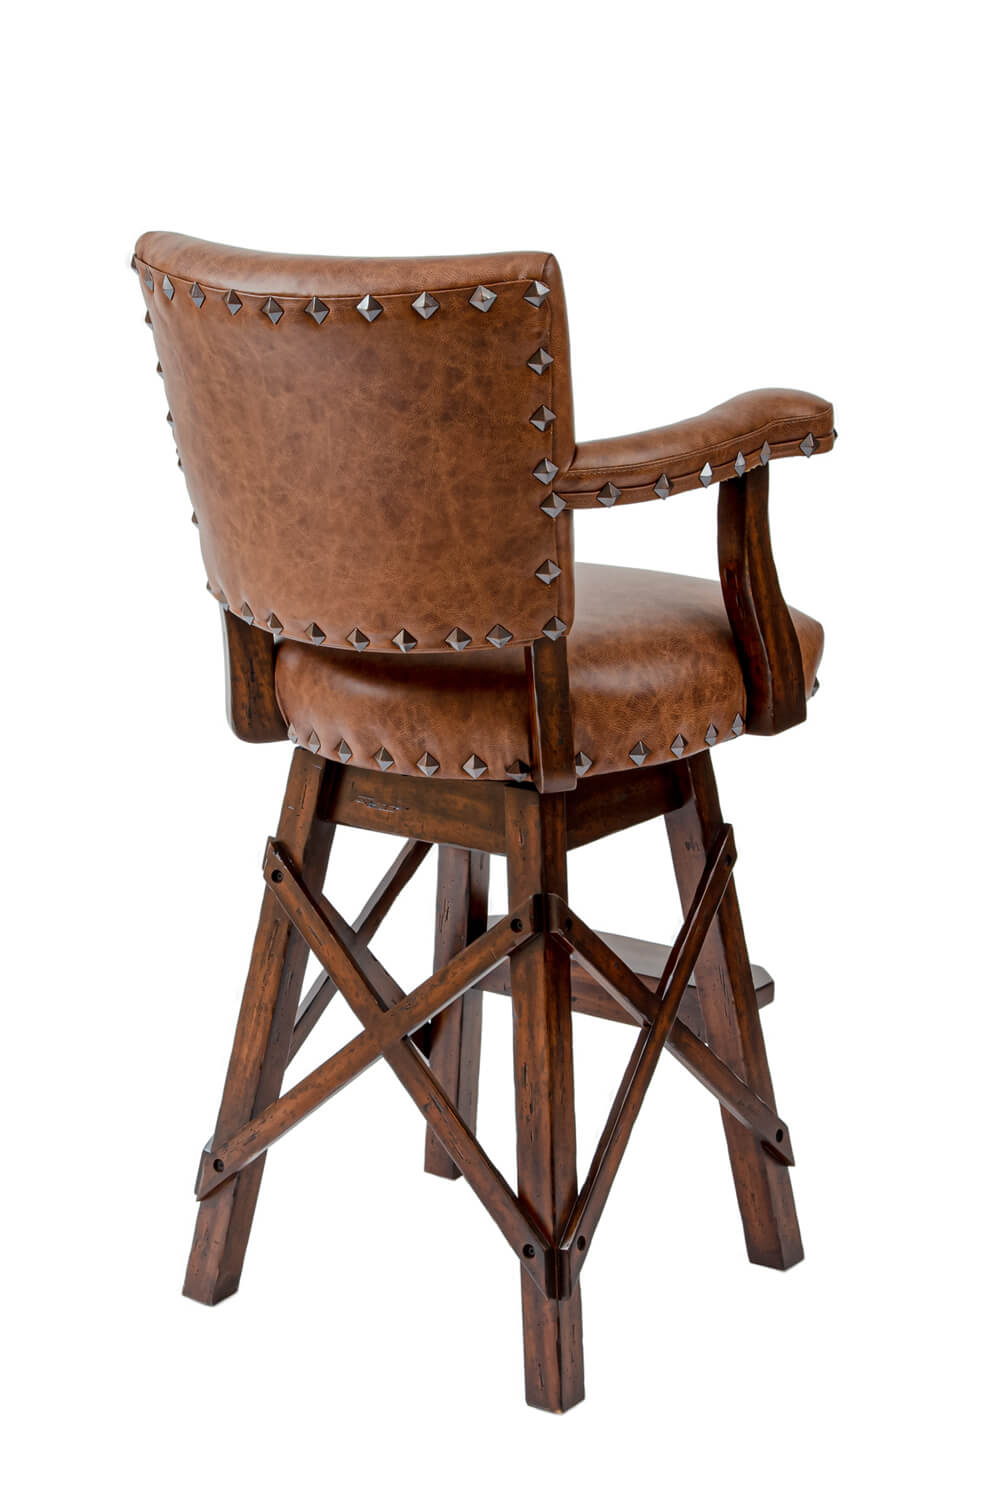 El Dorado Rustic Wood Swivel Stool, Leather Bar Stools With Backs And Arms